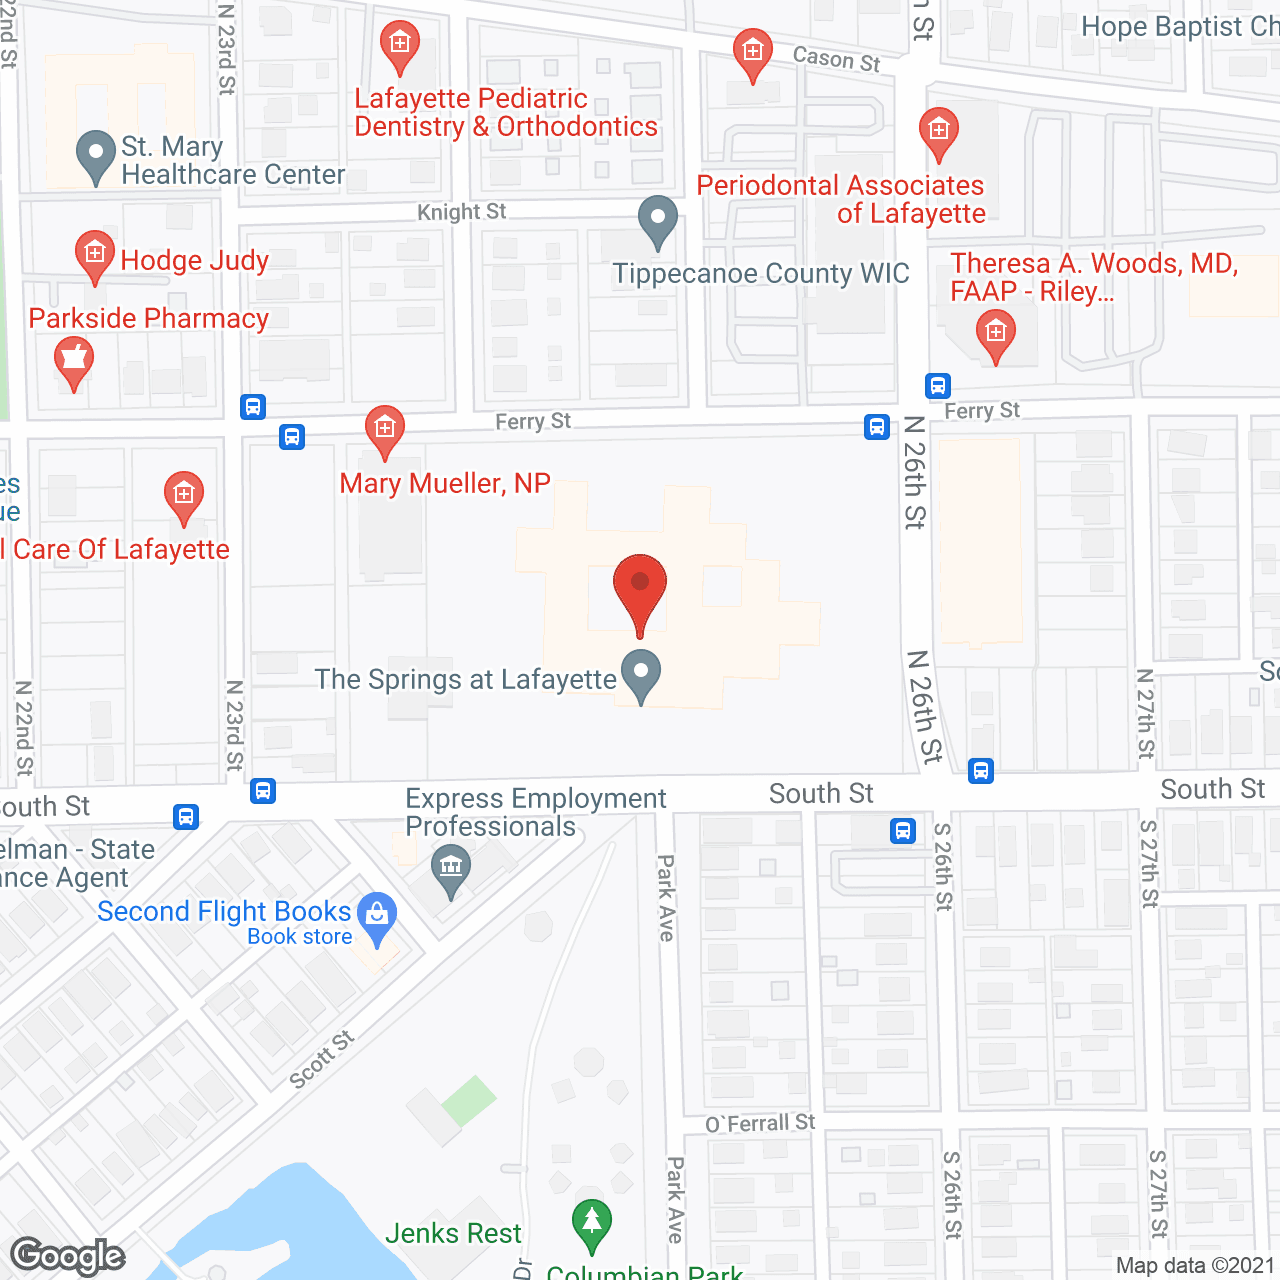 The Springs at Lafayette in google map